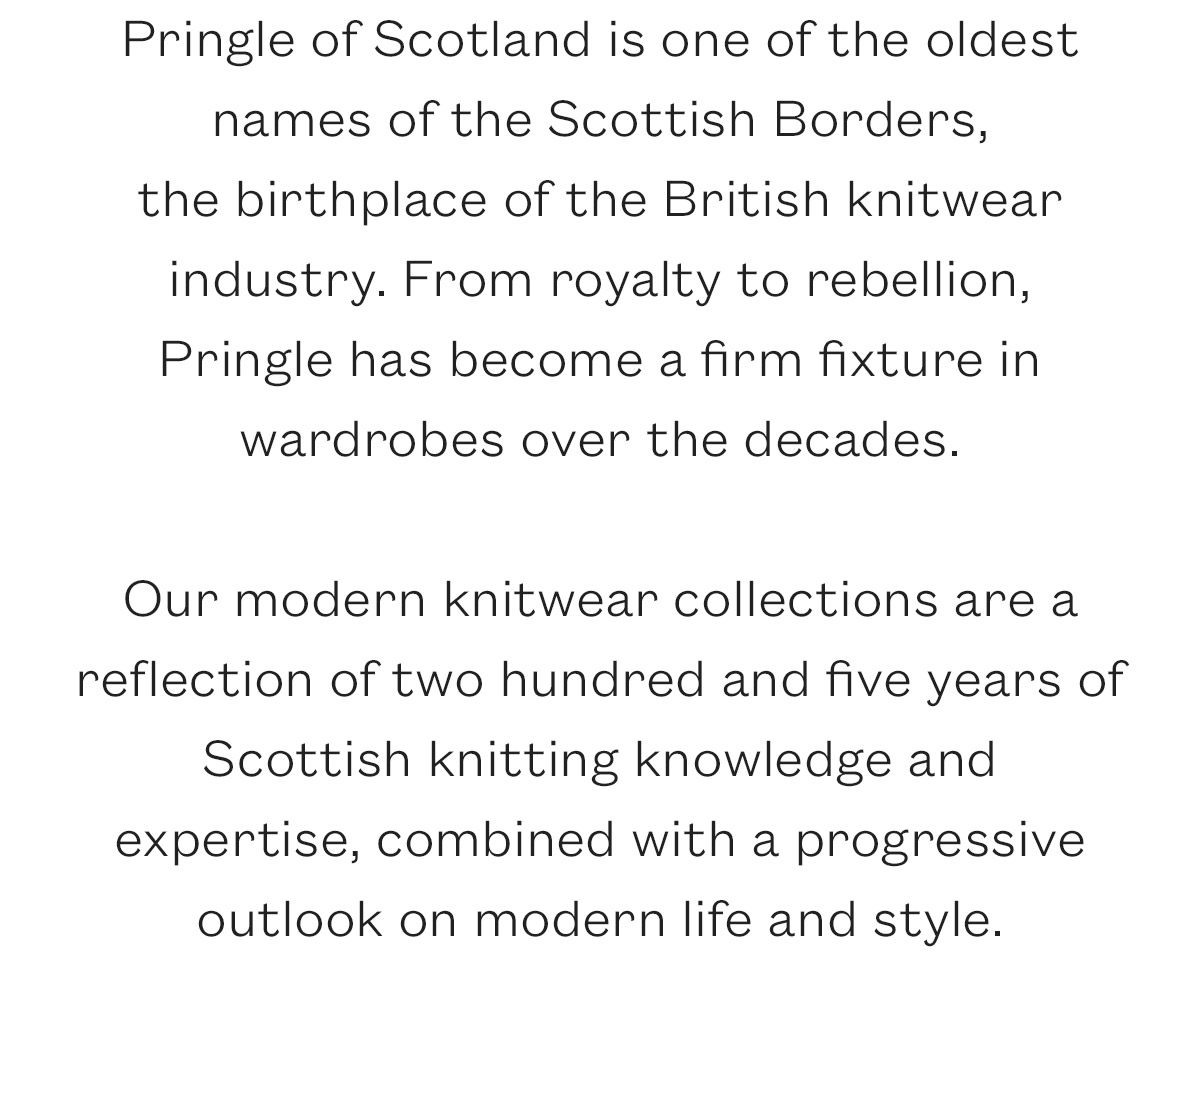 Pringle of Scotland is one of the oldest names of the Scottish Borders,  the birthplace of the British knitwear industry. From royalty to rebellion, Pringle has become a firm fixture in wardrobes over the decades.   Our modern knitwear collections are a reflection of two hundred and five years of Scottish knitting knowledge and expertise, combined with a progressive outlook on modern life and style. 